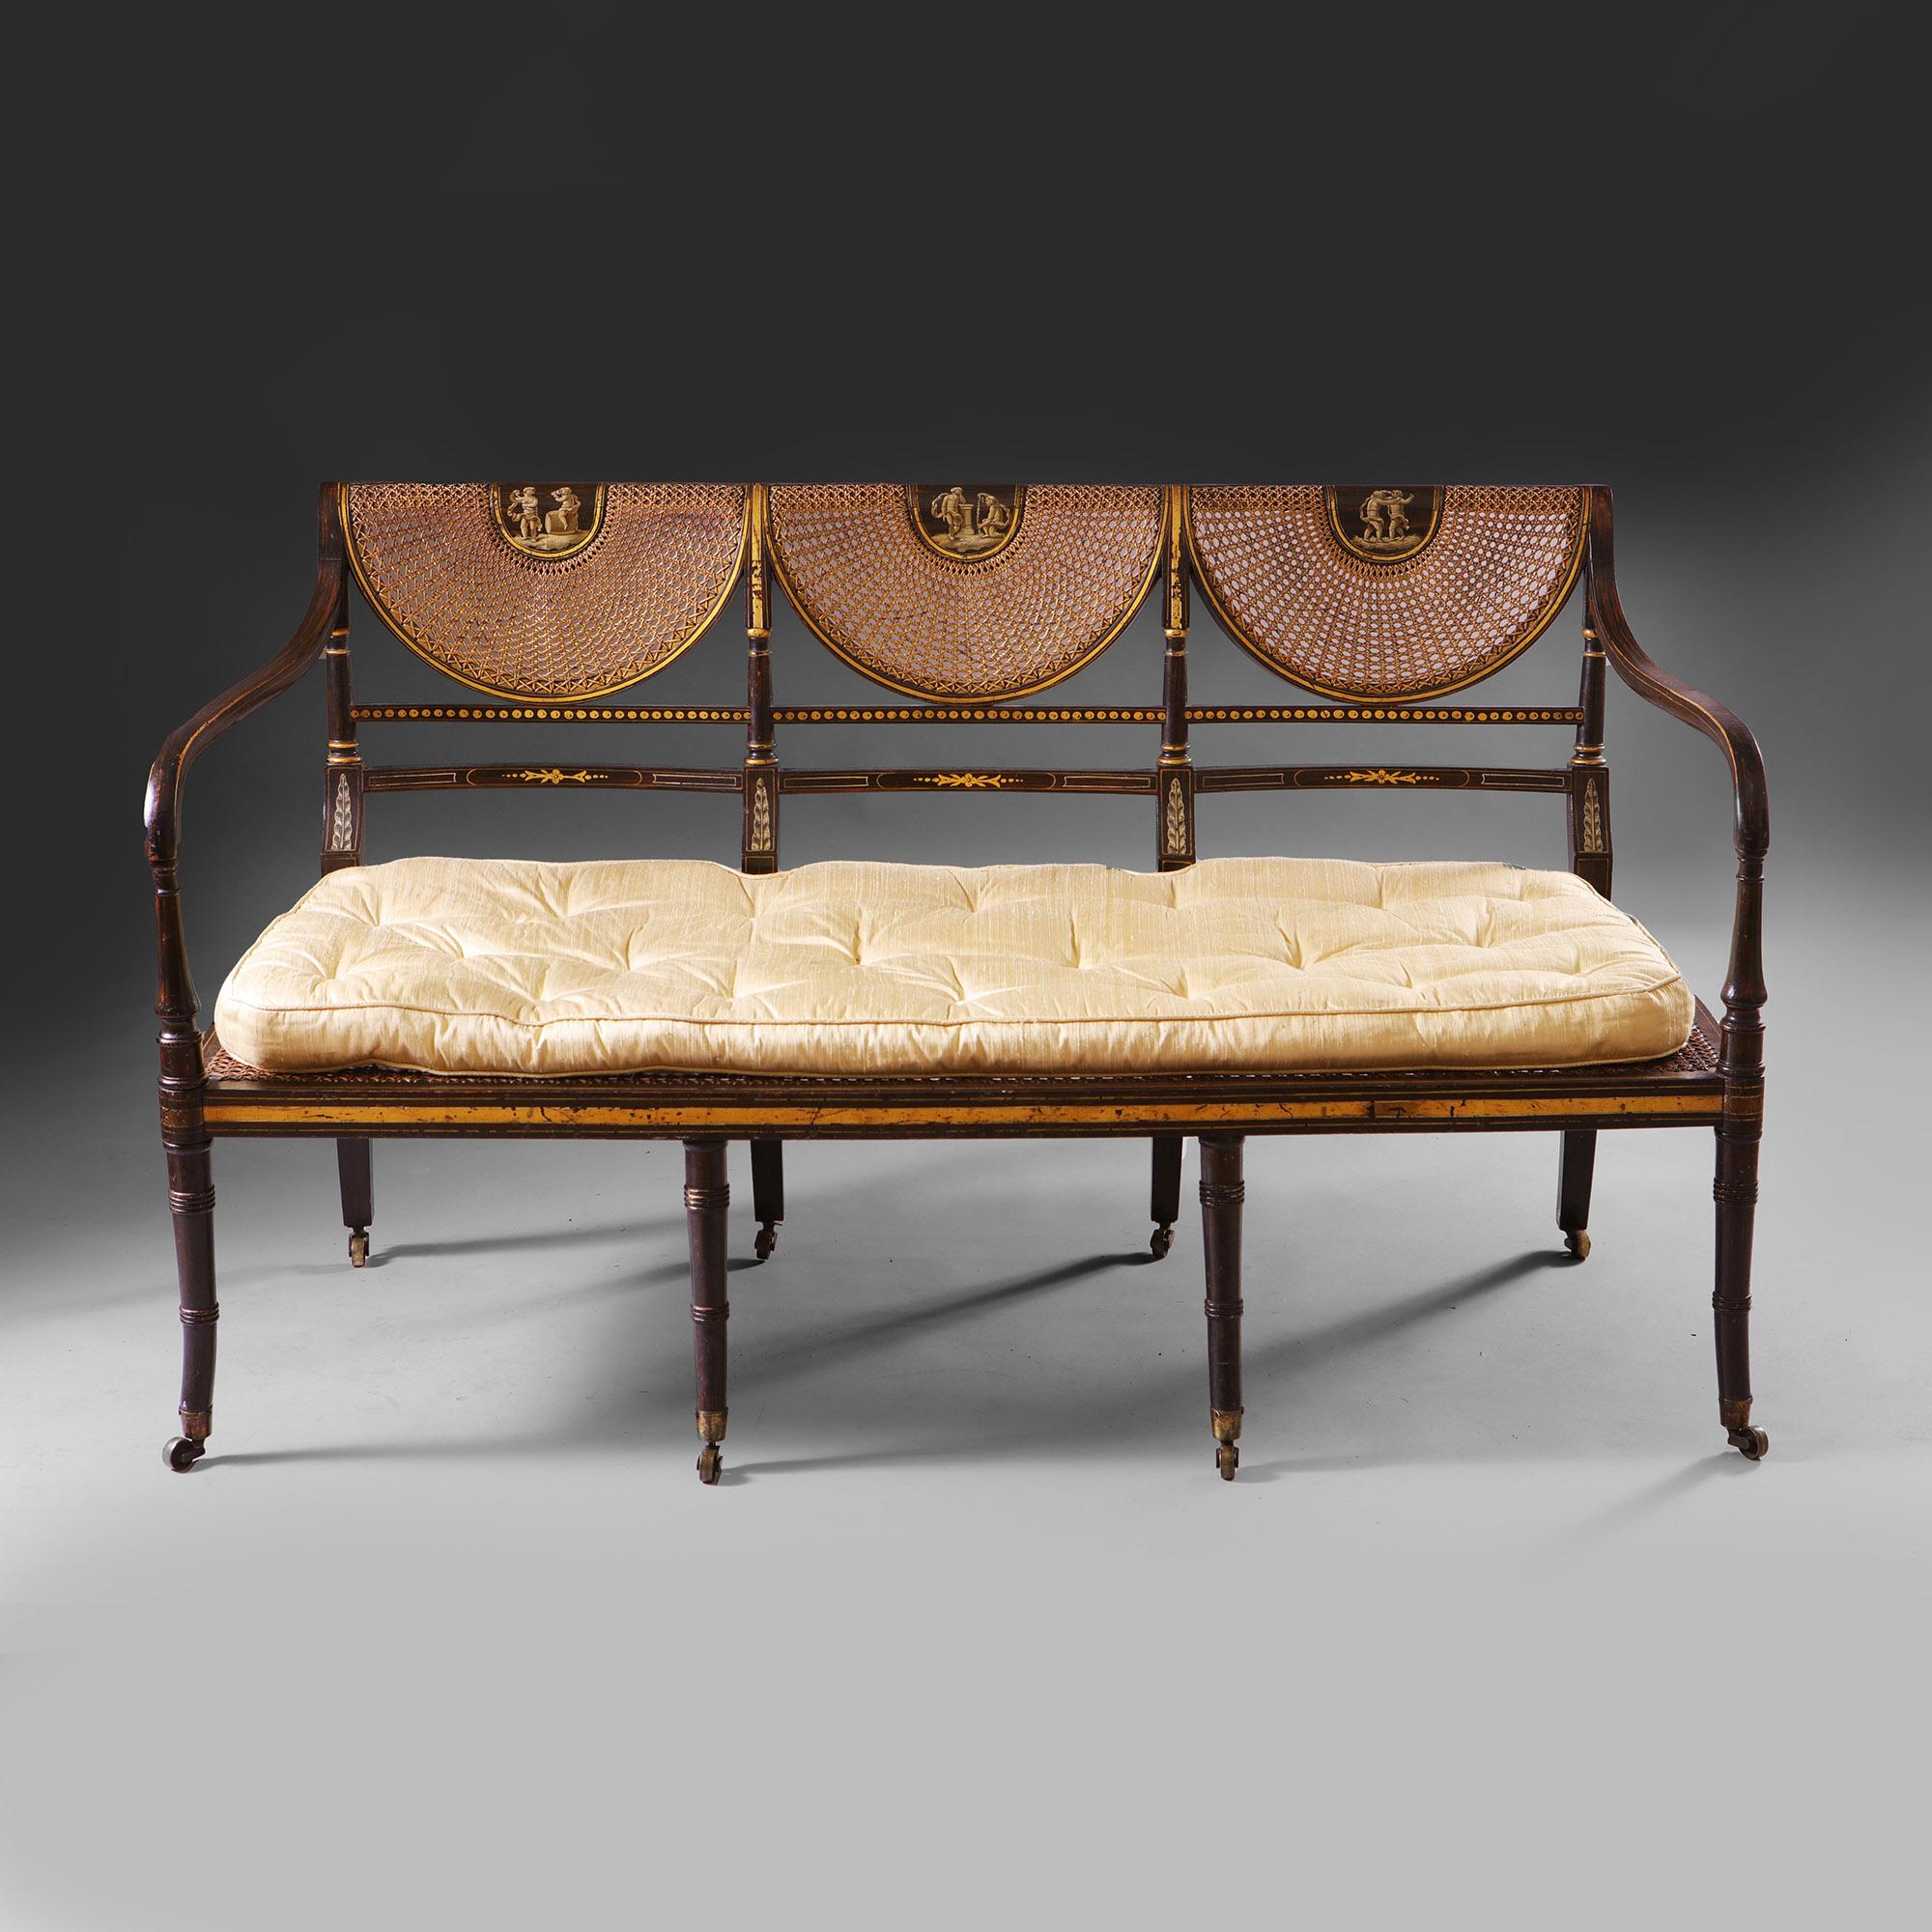 Regency A Fine Simulated Rosewood and Gilt Decorated George III Sheraton Period Settee For Sale